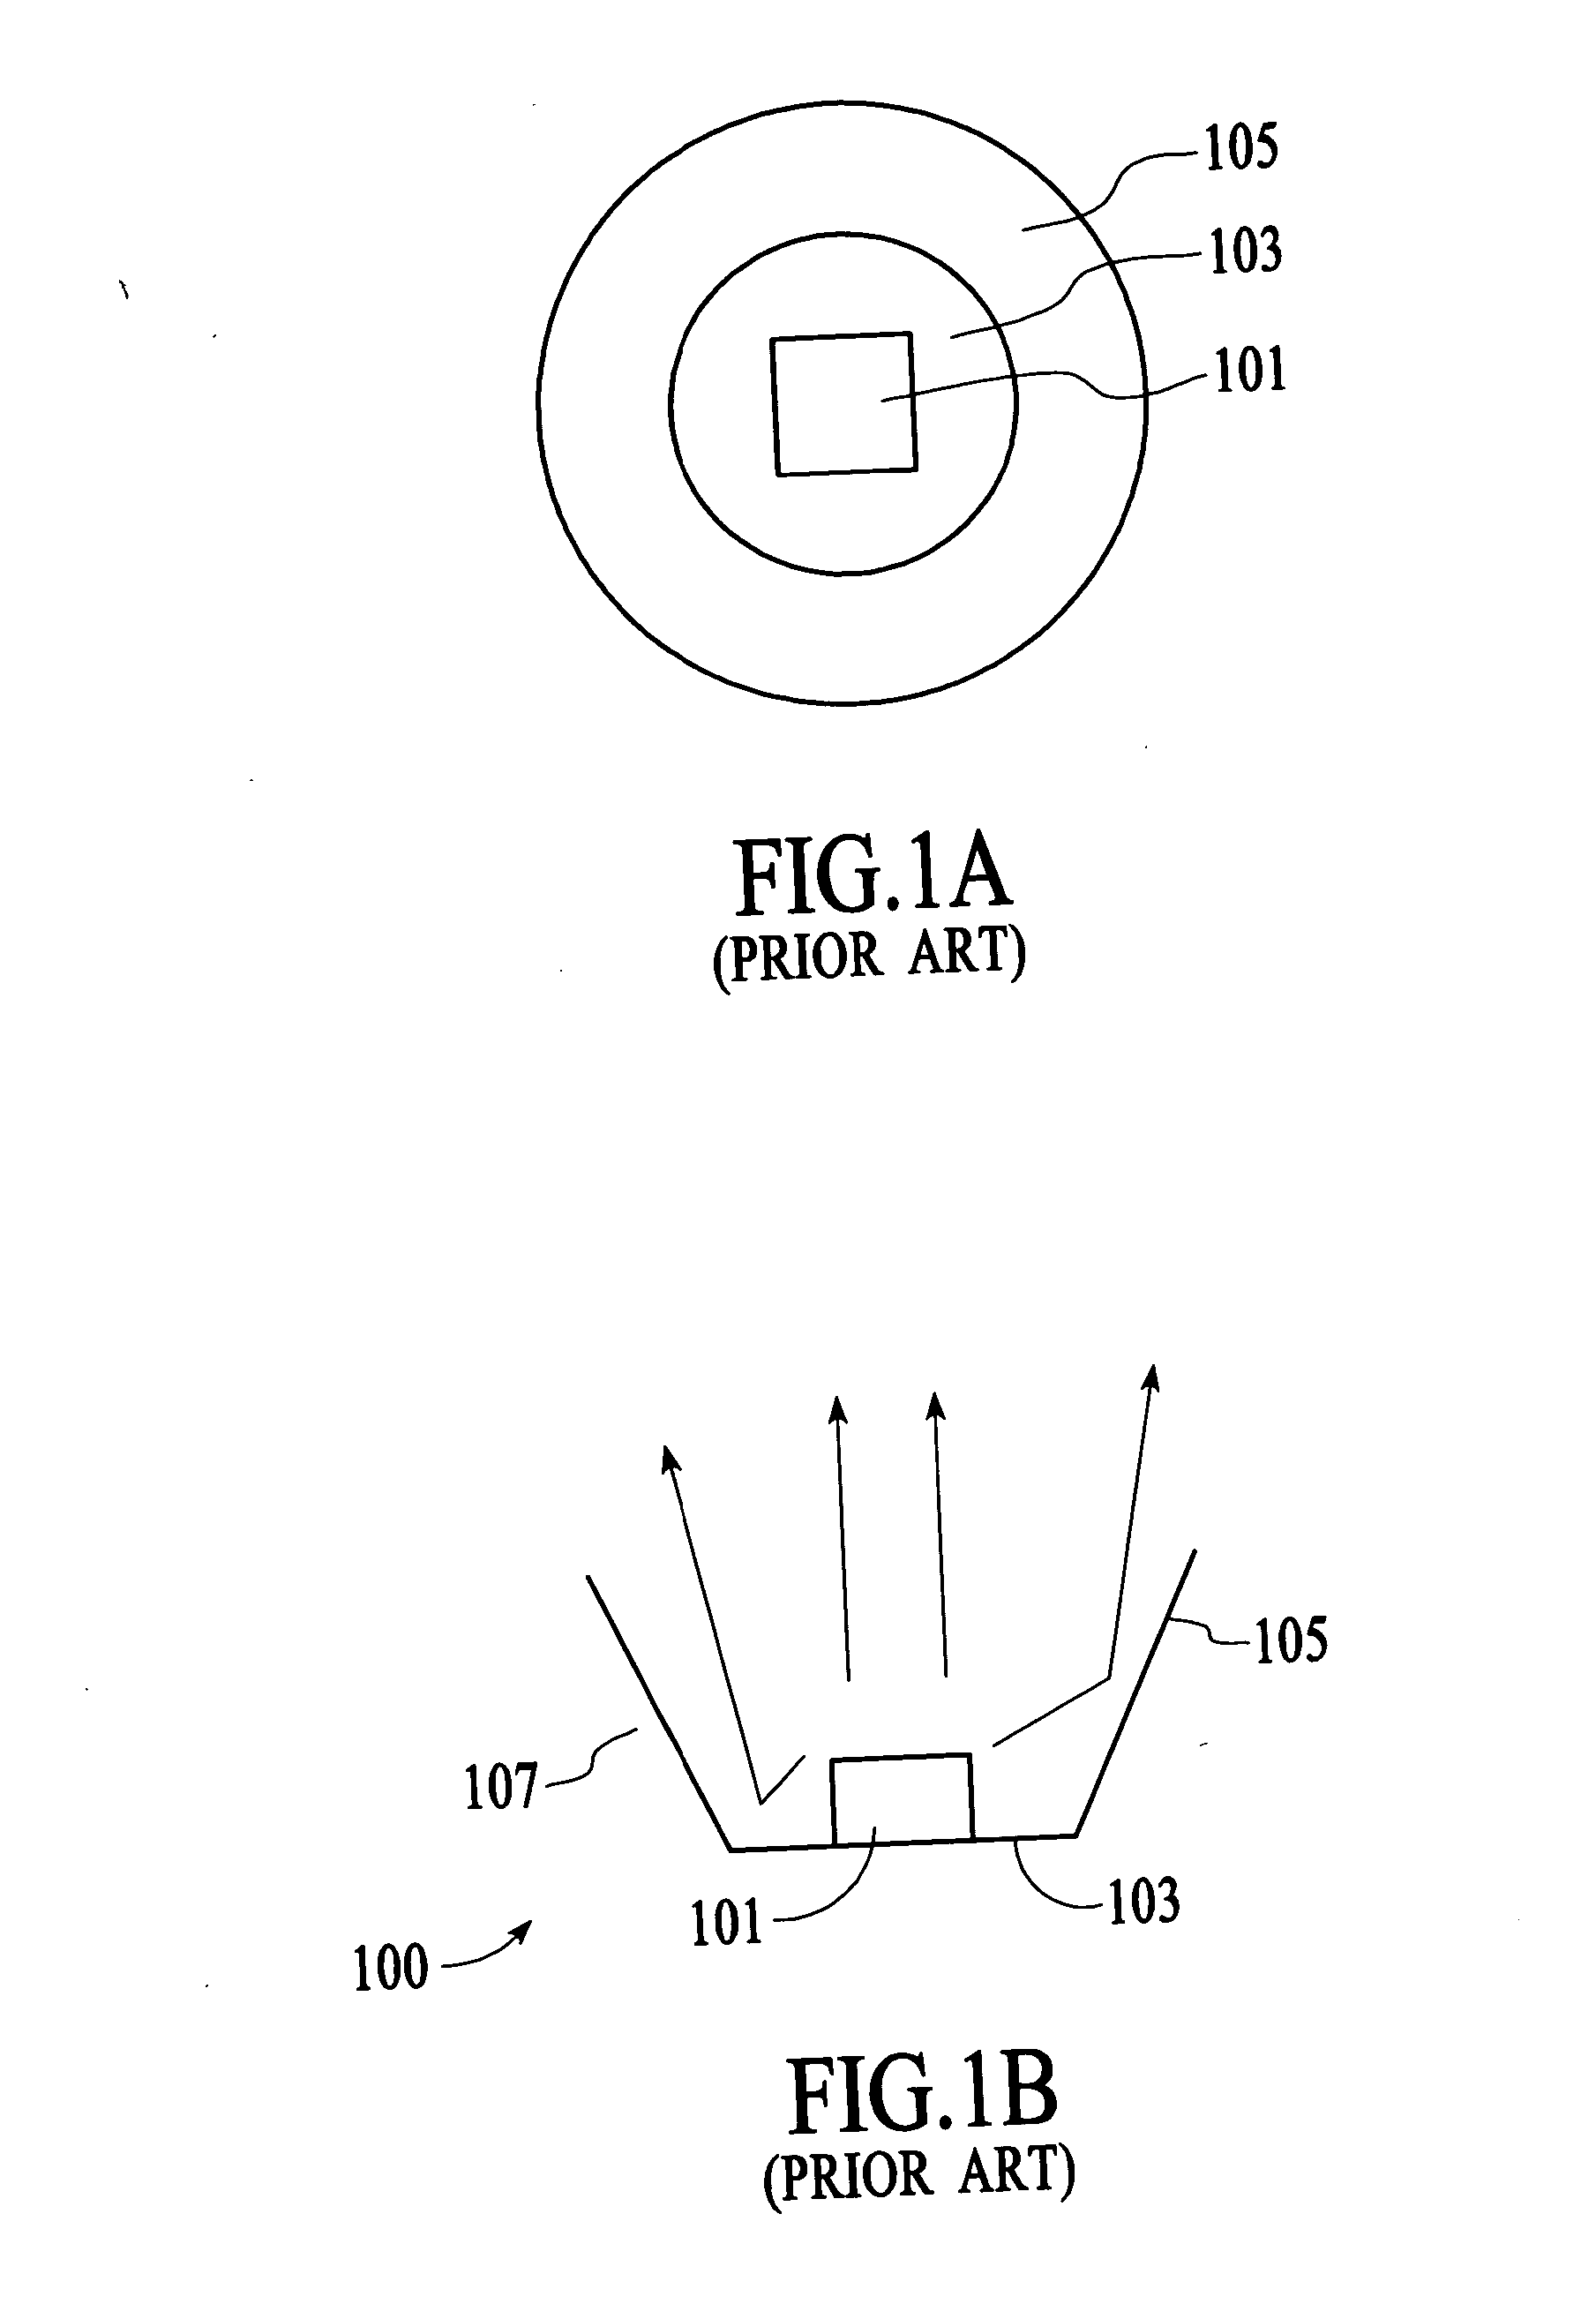 Light emitting device with adjustable reflector cup